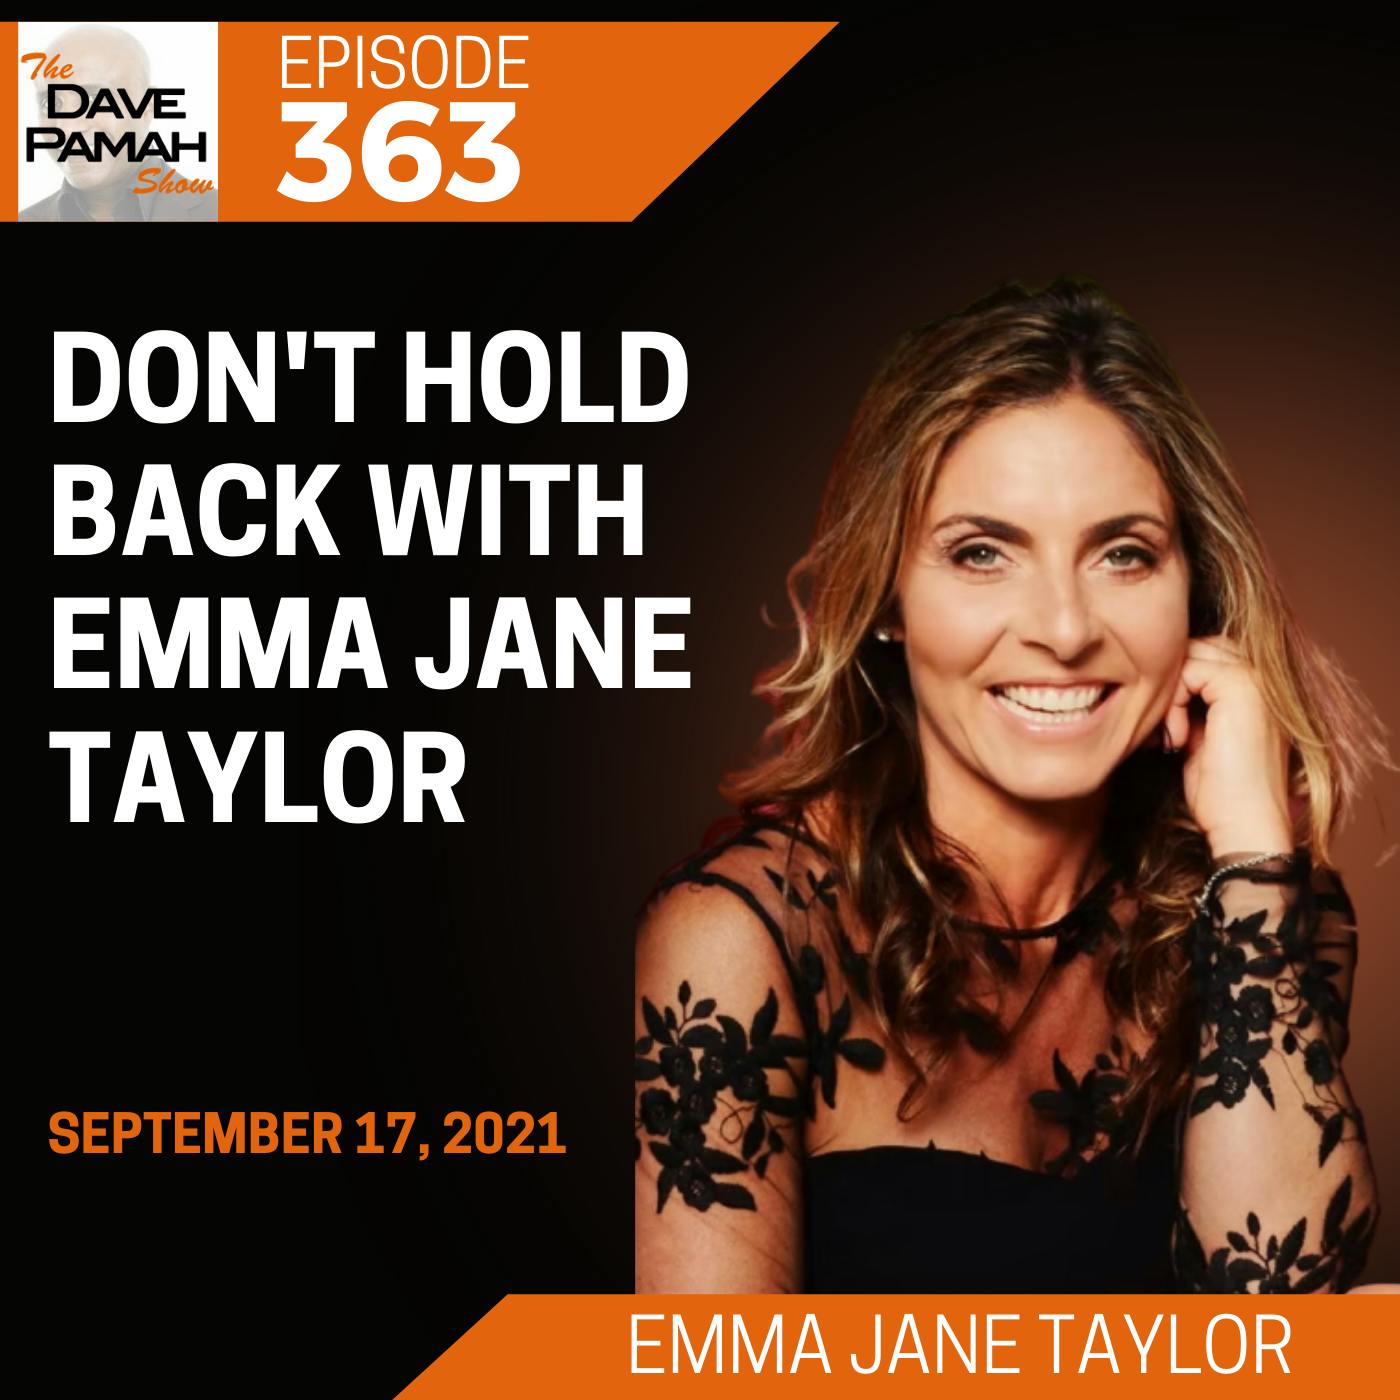 Don't hold back with Emma Jane Taylor